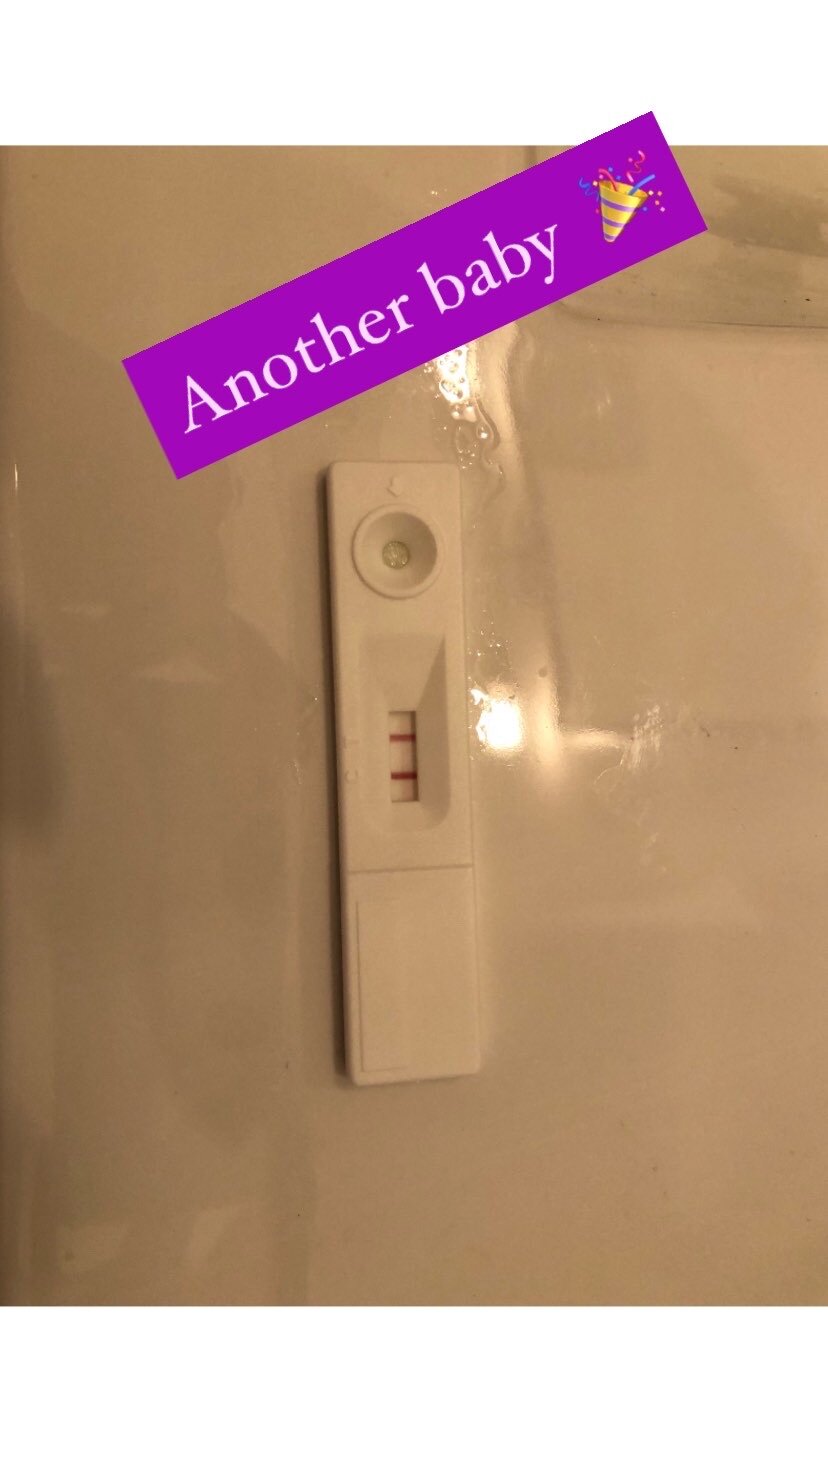  SuJok acupuncture treatment based in Vancouver at Alla Ozerova acupuncture clinic used to treat Fertility. Picture of positive pregnancy test 